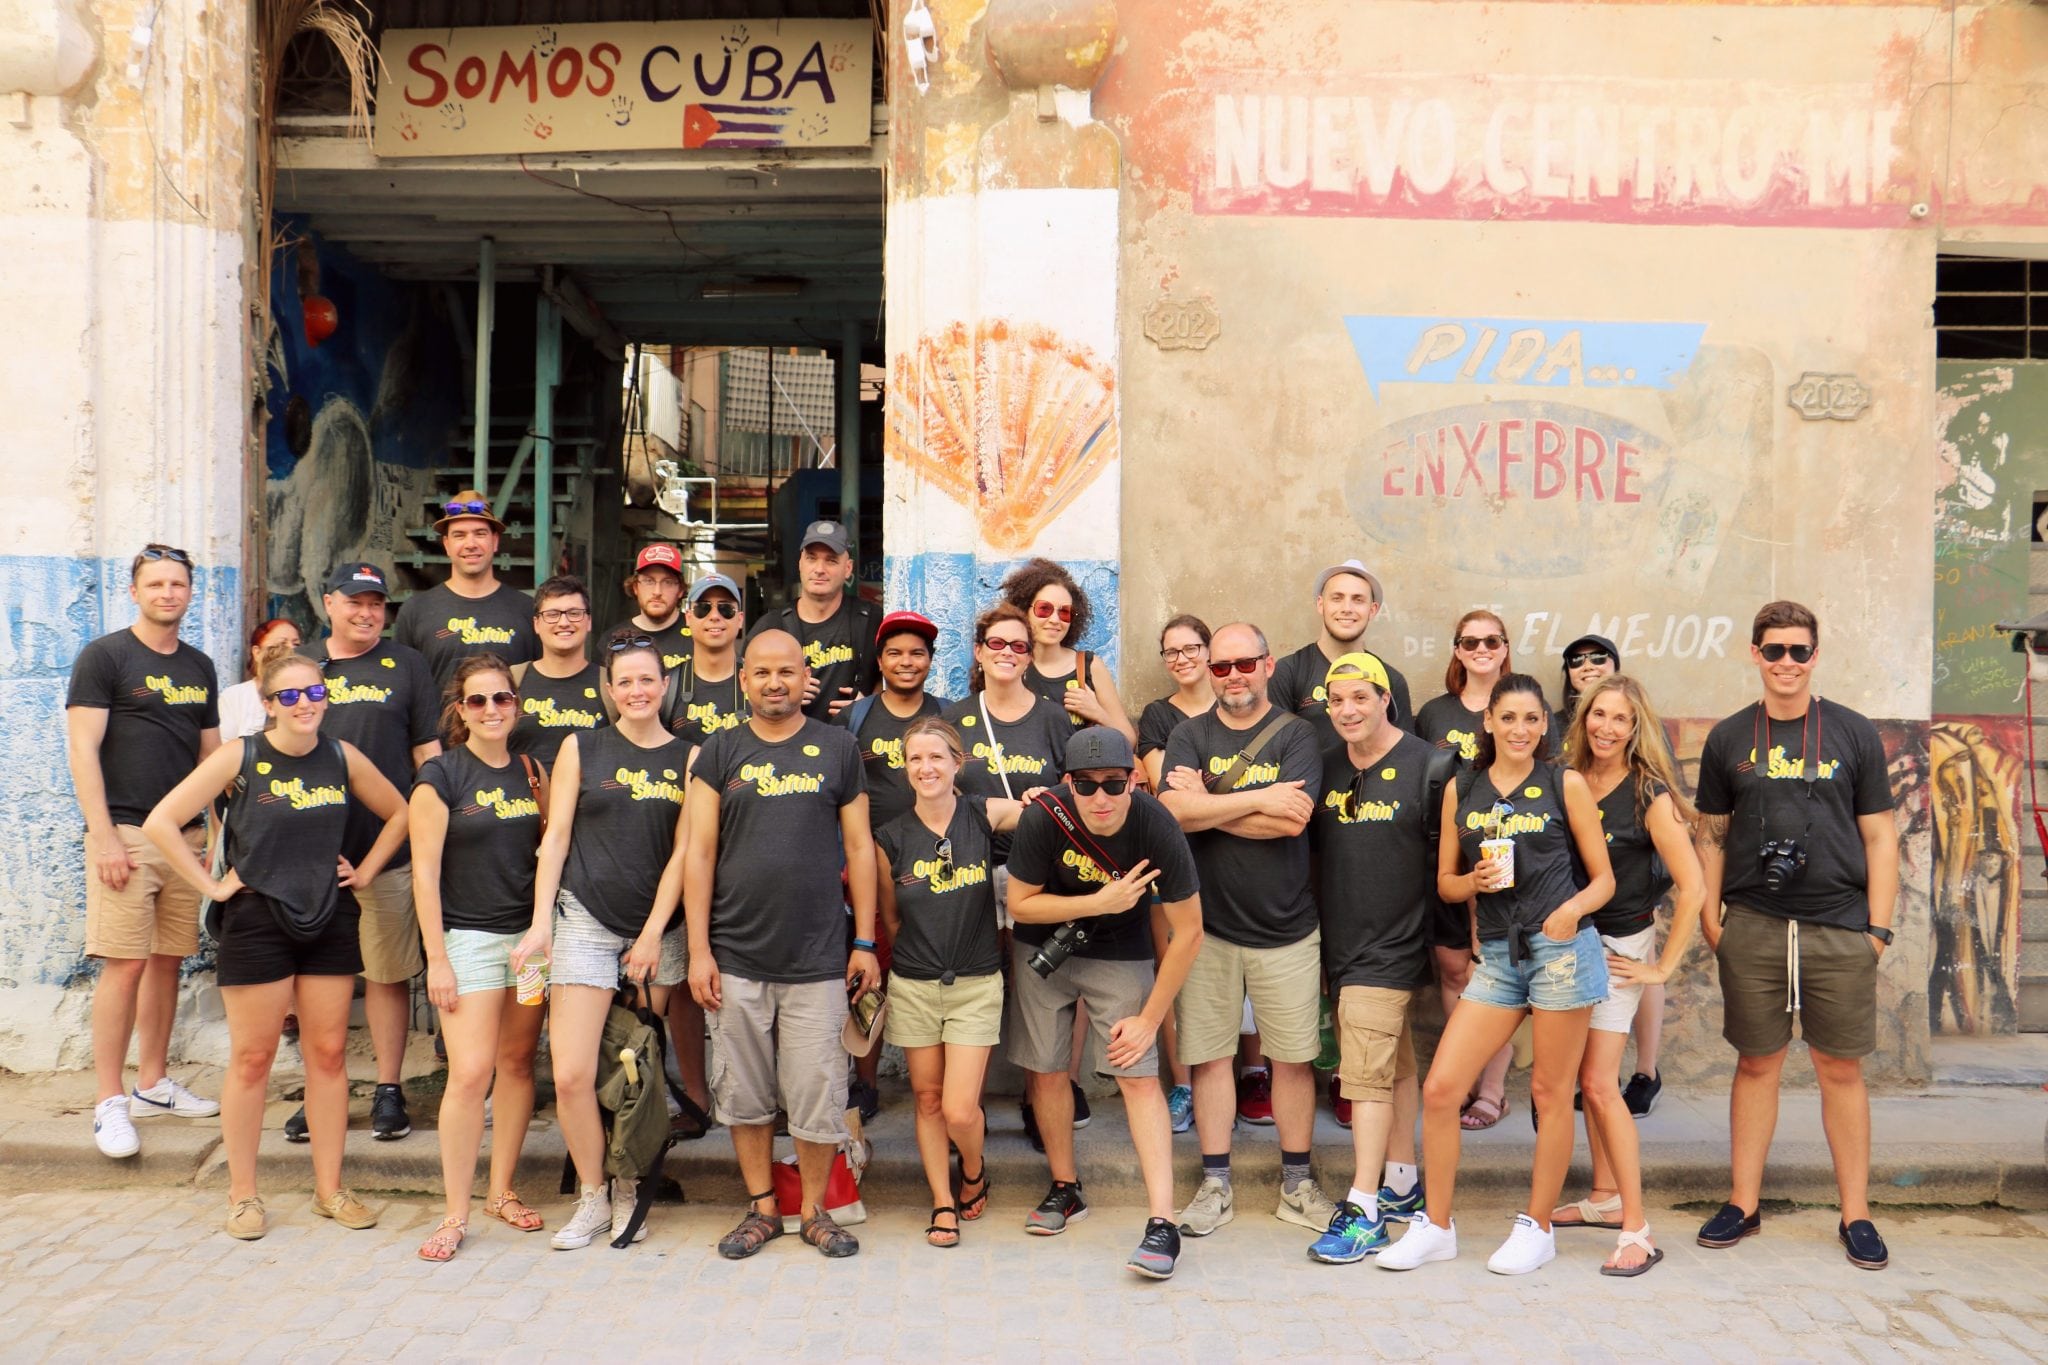 The Skift team that went to Cuba last week is already bigger now than this photo from Havana.